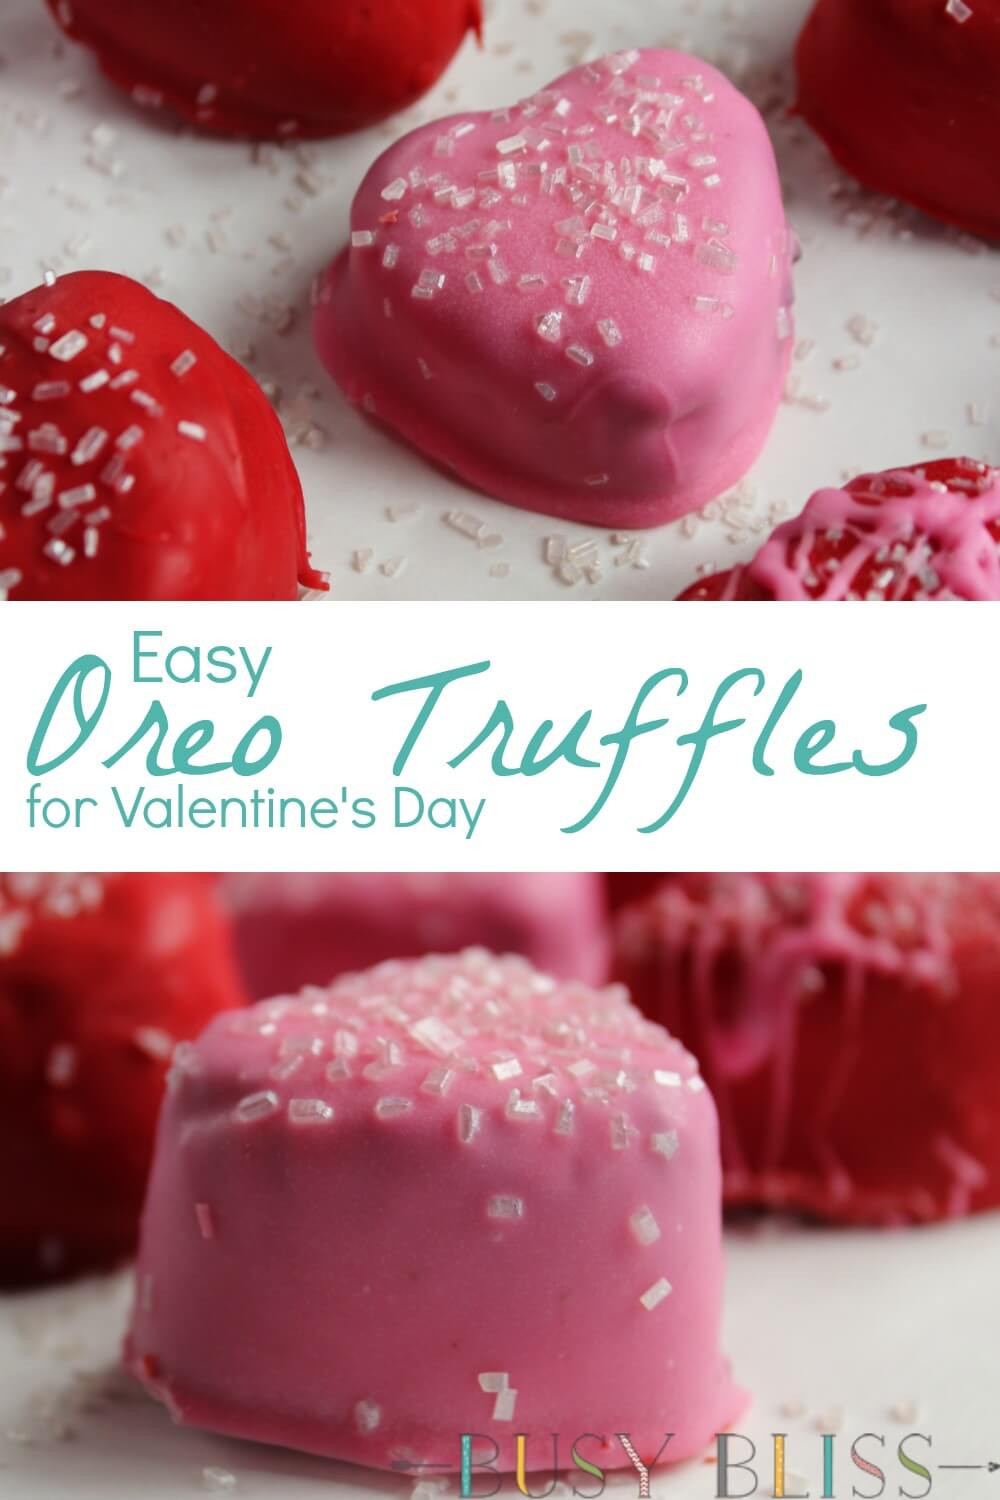 Easy Valentines Desserts
 Easy No Bake Oreo Cookie Truffles for Valentine s Day